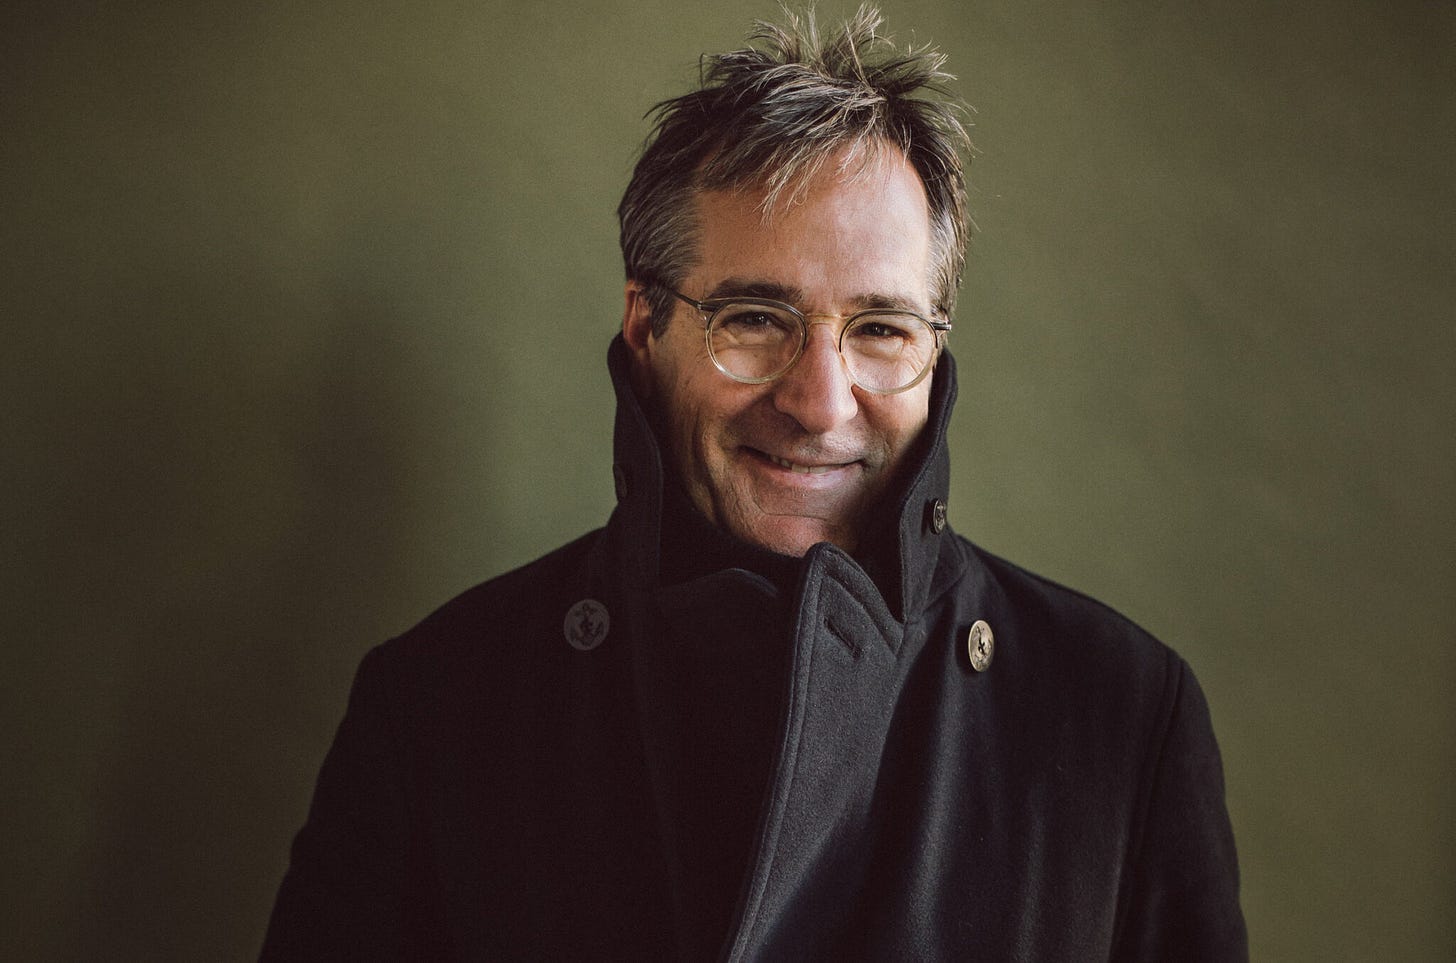 Richard Shindell smiling at the camera in an overcoat and glasses